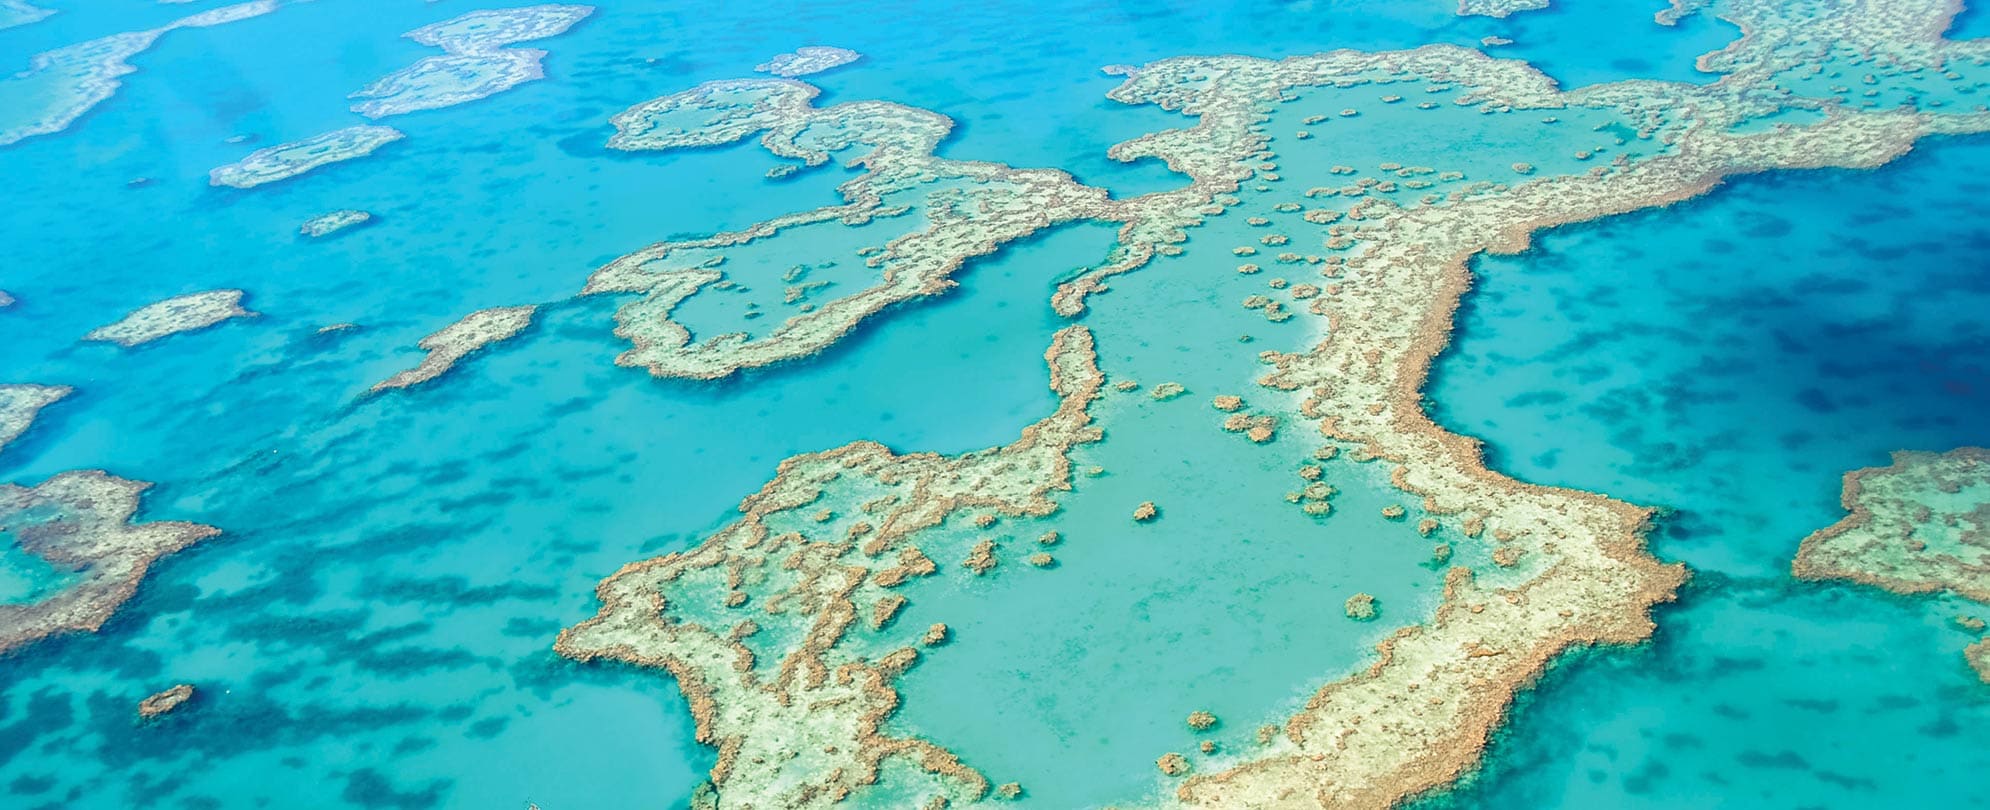 Aerial view of the Great Barrier Reef Marine Park.